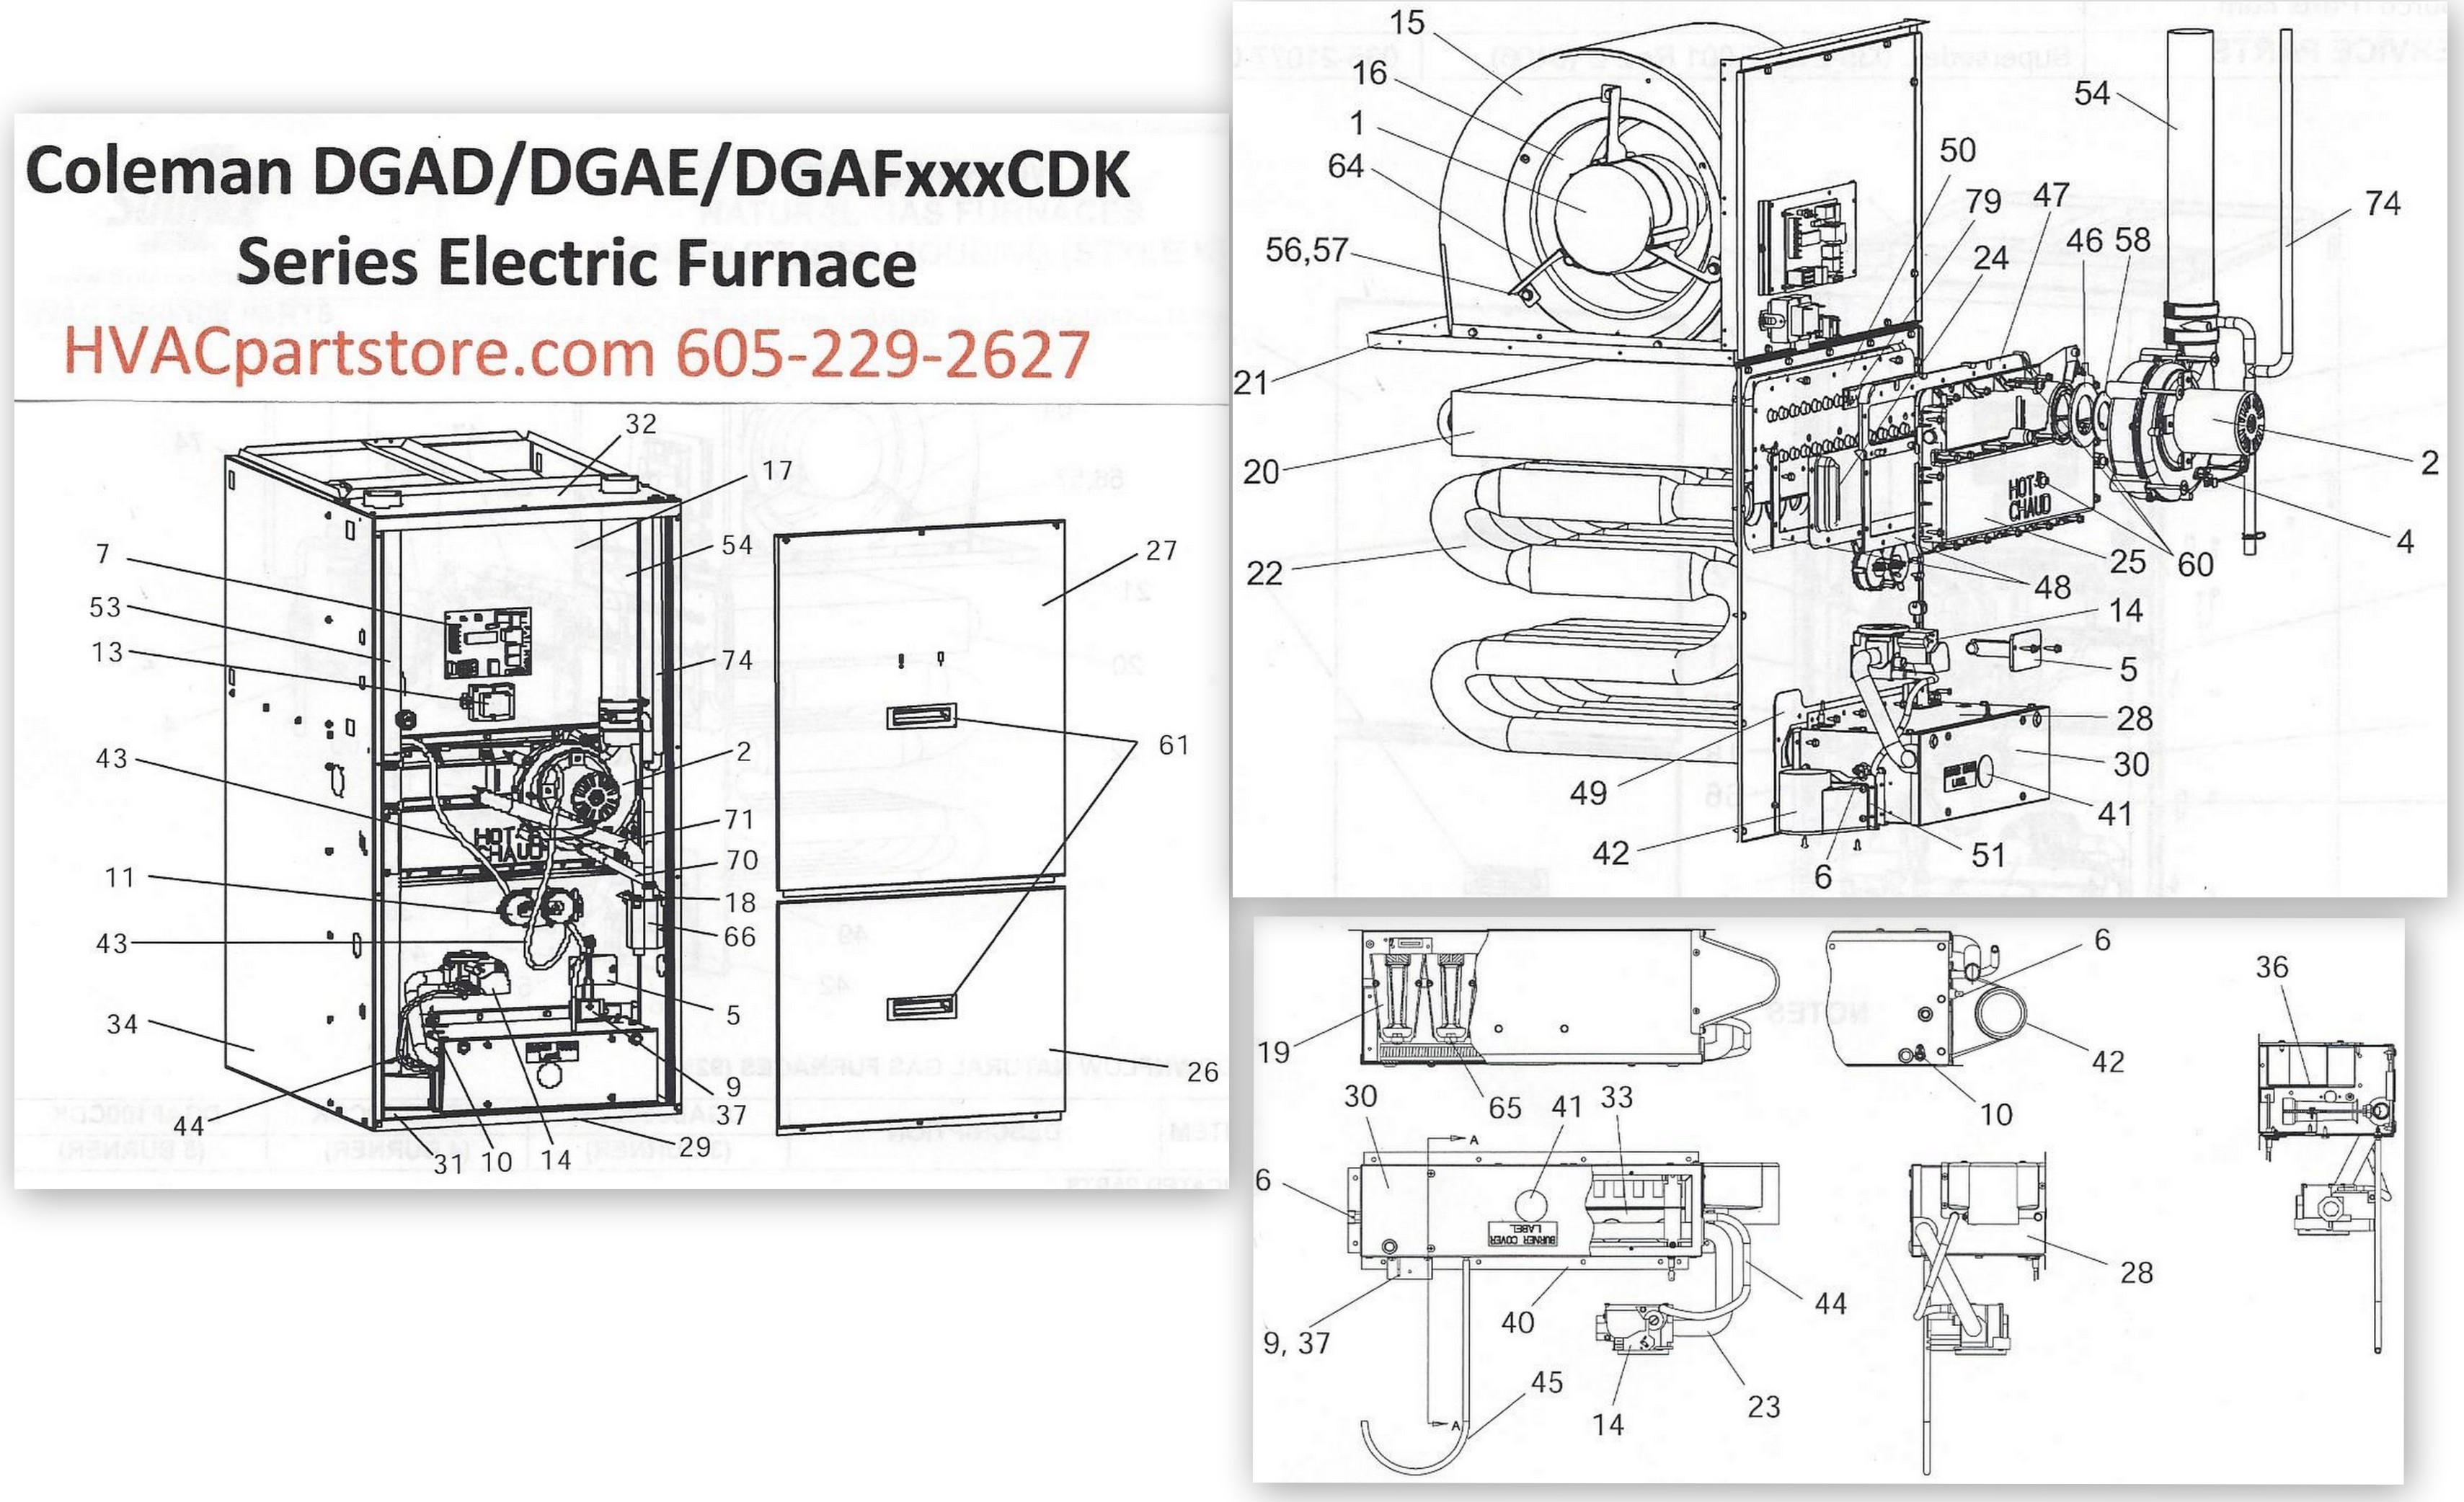 Wiring Diagram For Rv Furnace Best Atwood Furnace Wiring Diagram 8525 And Rv Hbphelp